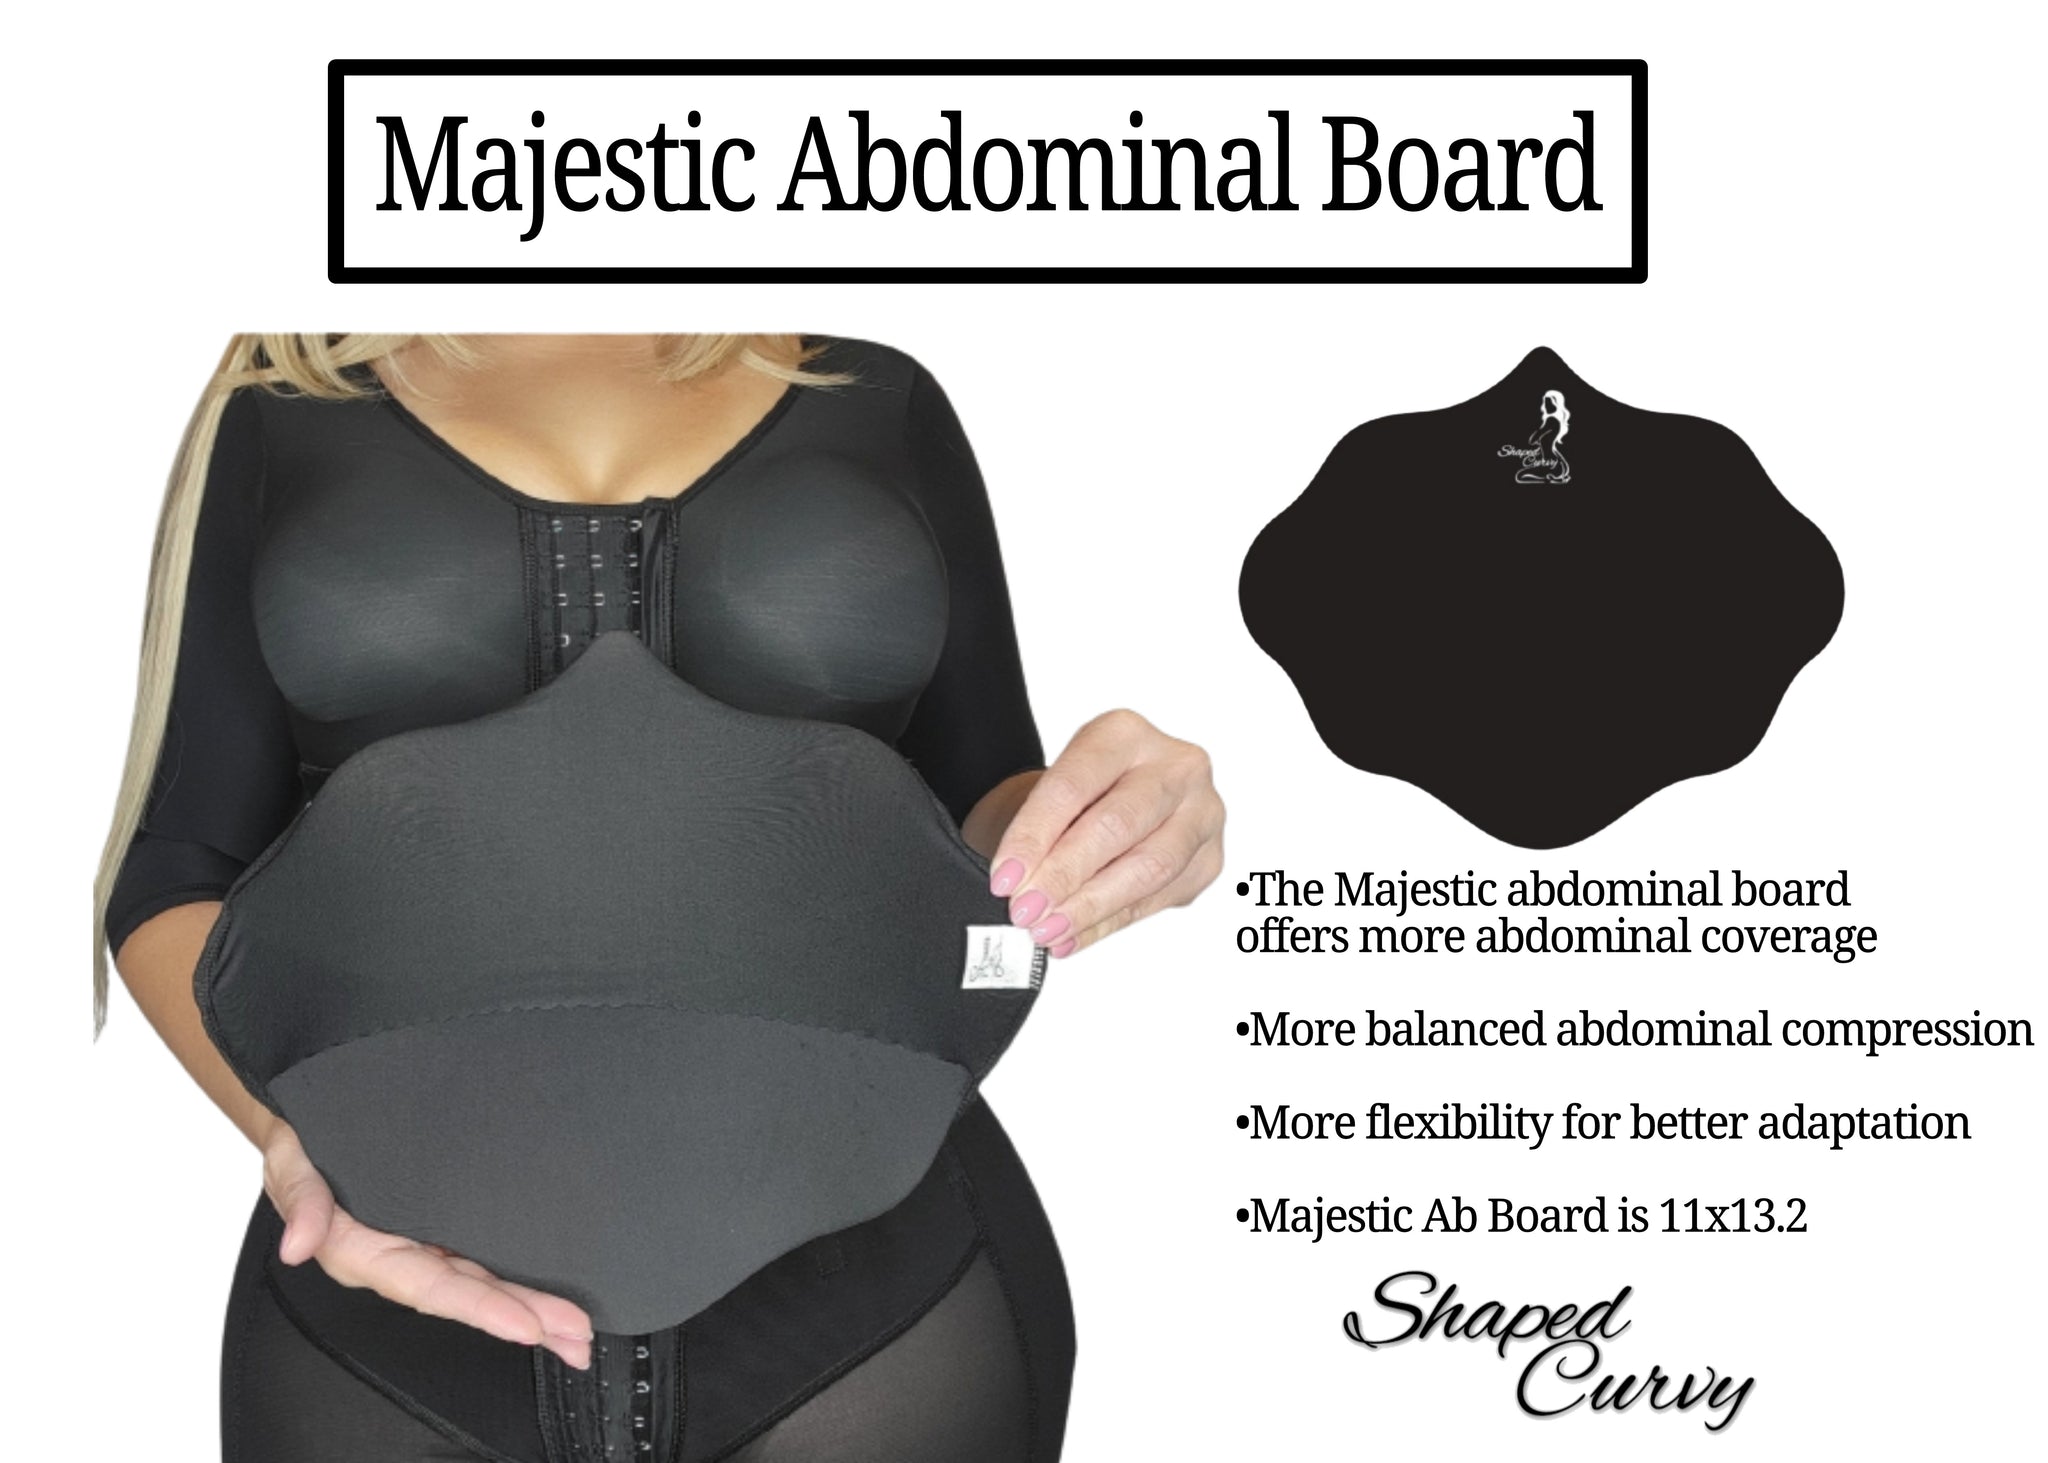 Butterfly Abdominal Board - Endless By MG